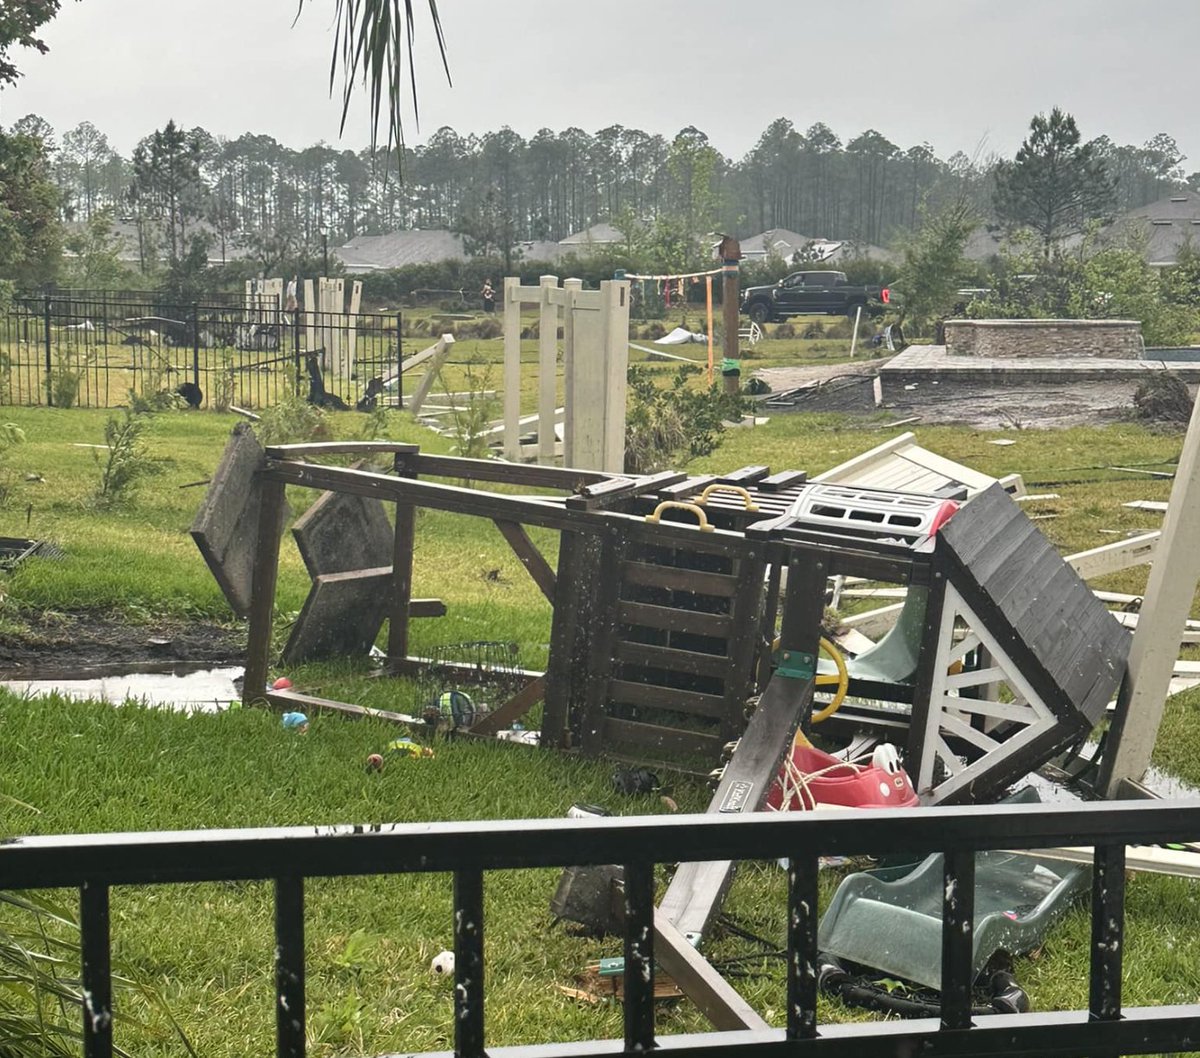 🚨#UPDATE: Photos show some damage from the confirmed large damaging tornado that passed through the World Golf Village in St. Augustine, Florida, earlier today no injuries have been reported